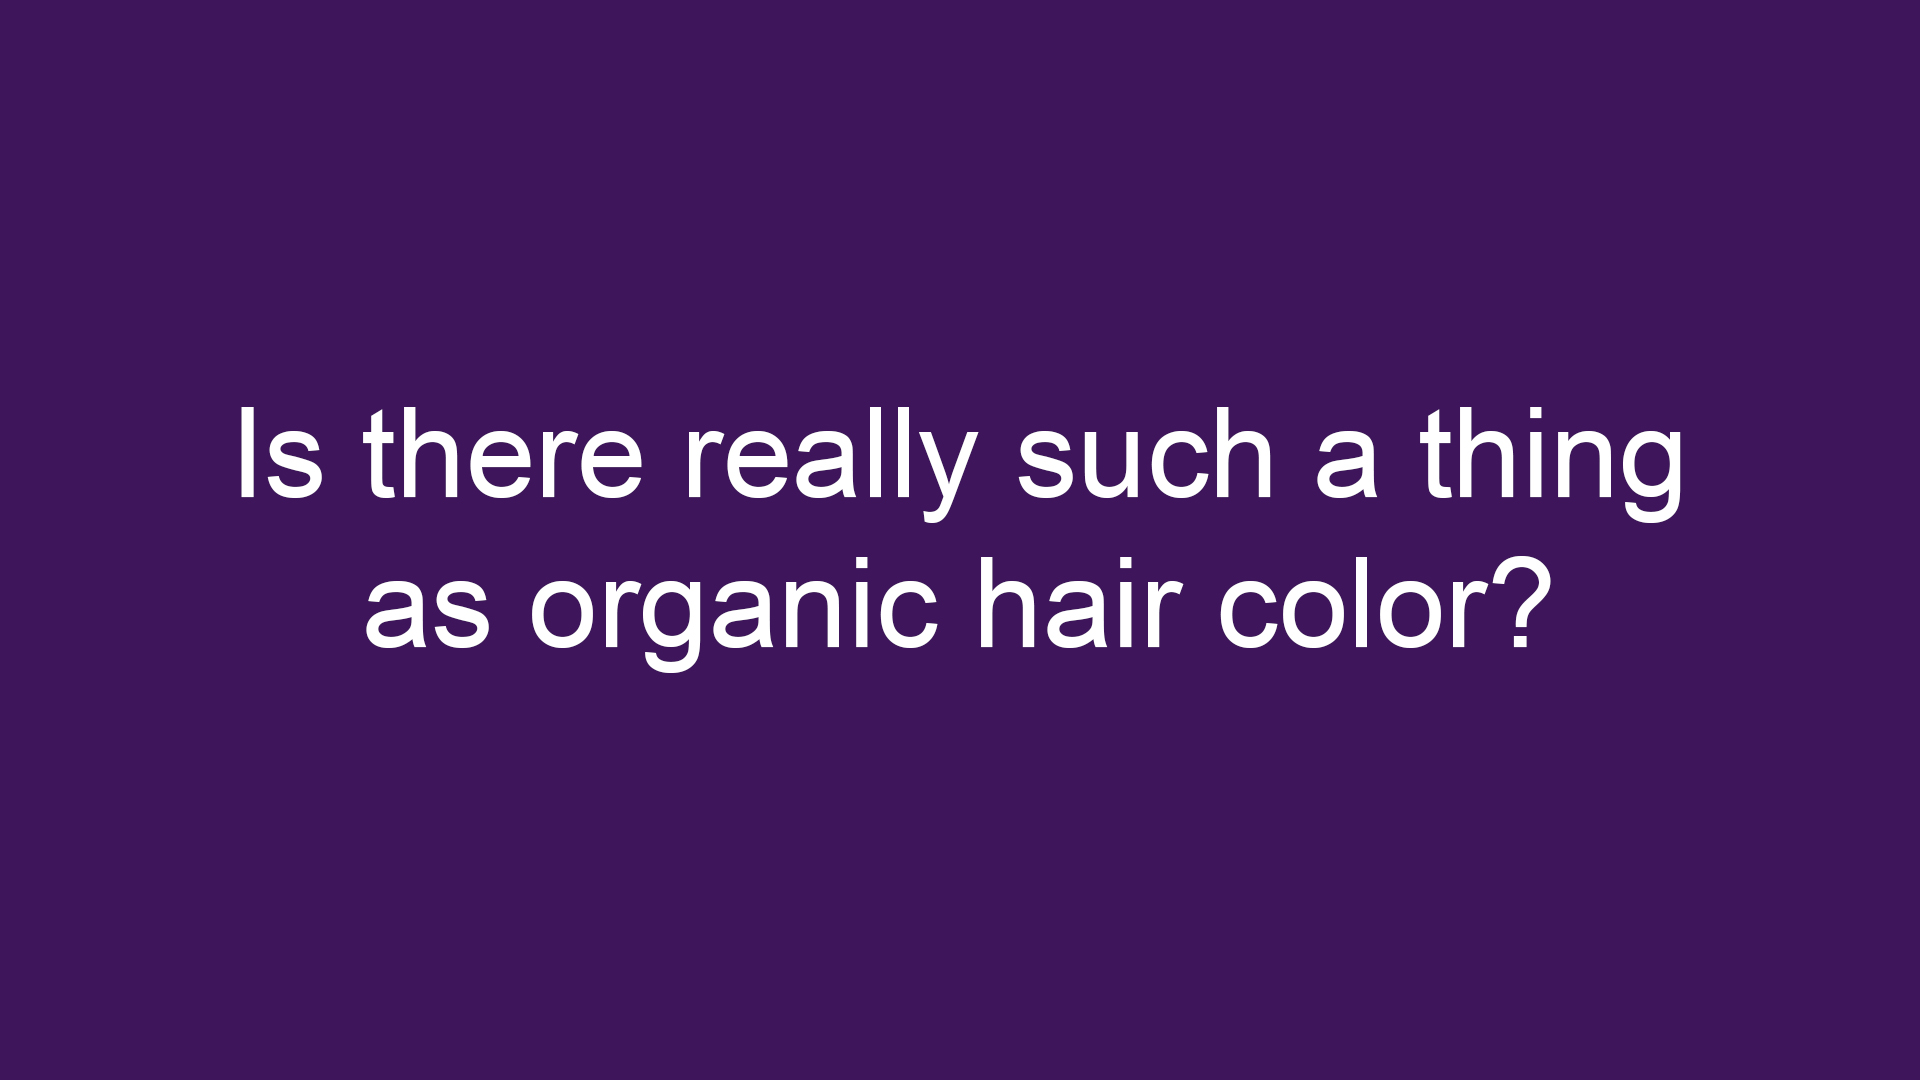 Is there really such a thing as organic hair color